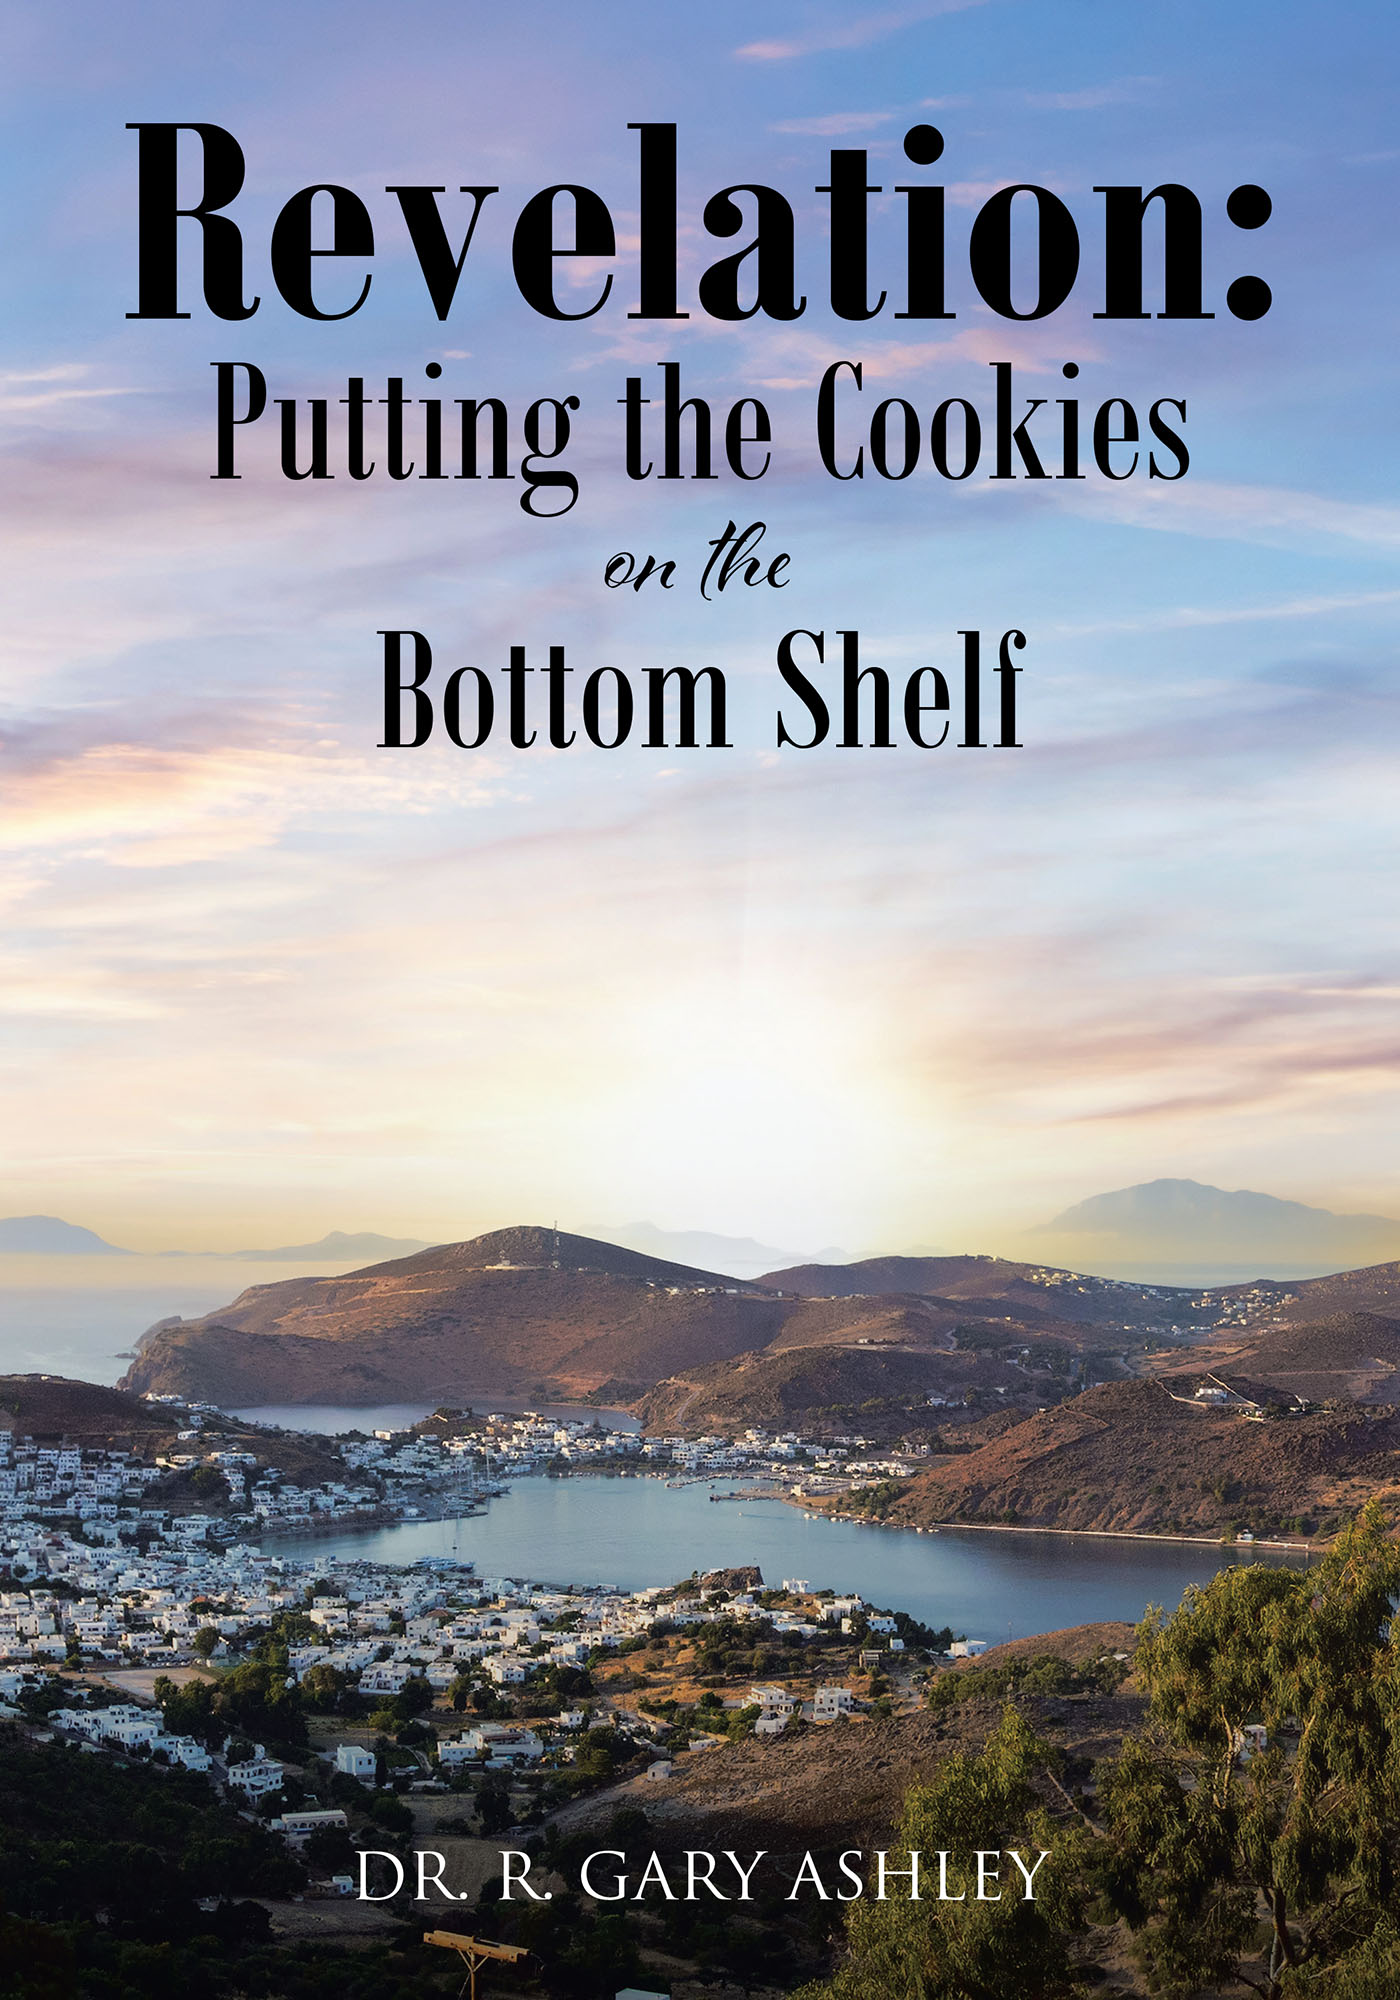 Dr. R. Gary Ashley’s Newly Released "Revelation: Putting the Cookies on the Bottom Shelf" is an Informative Examination of the Book of Revelation